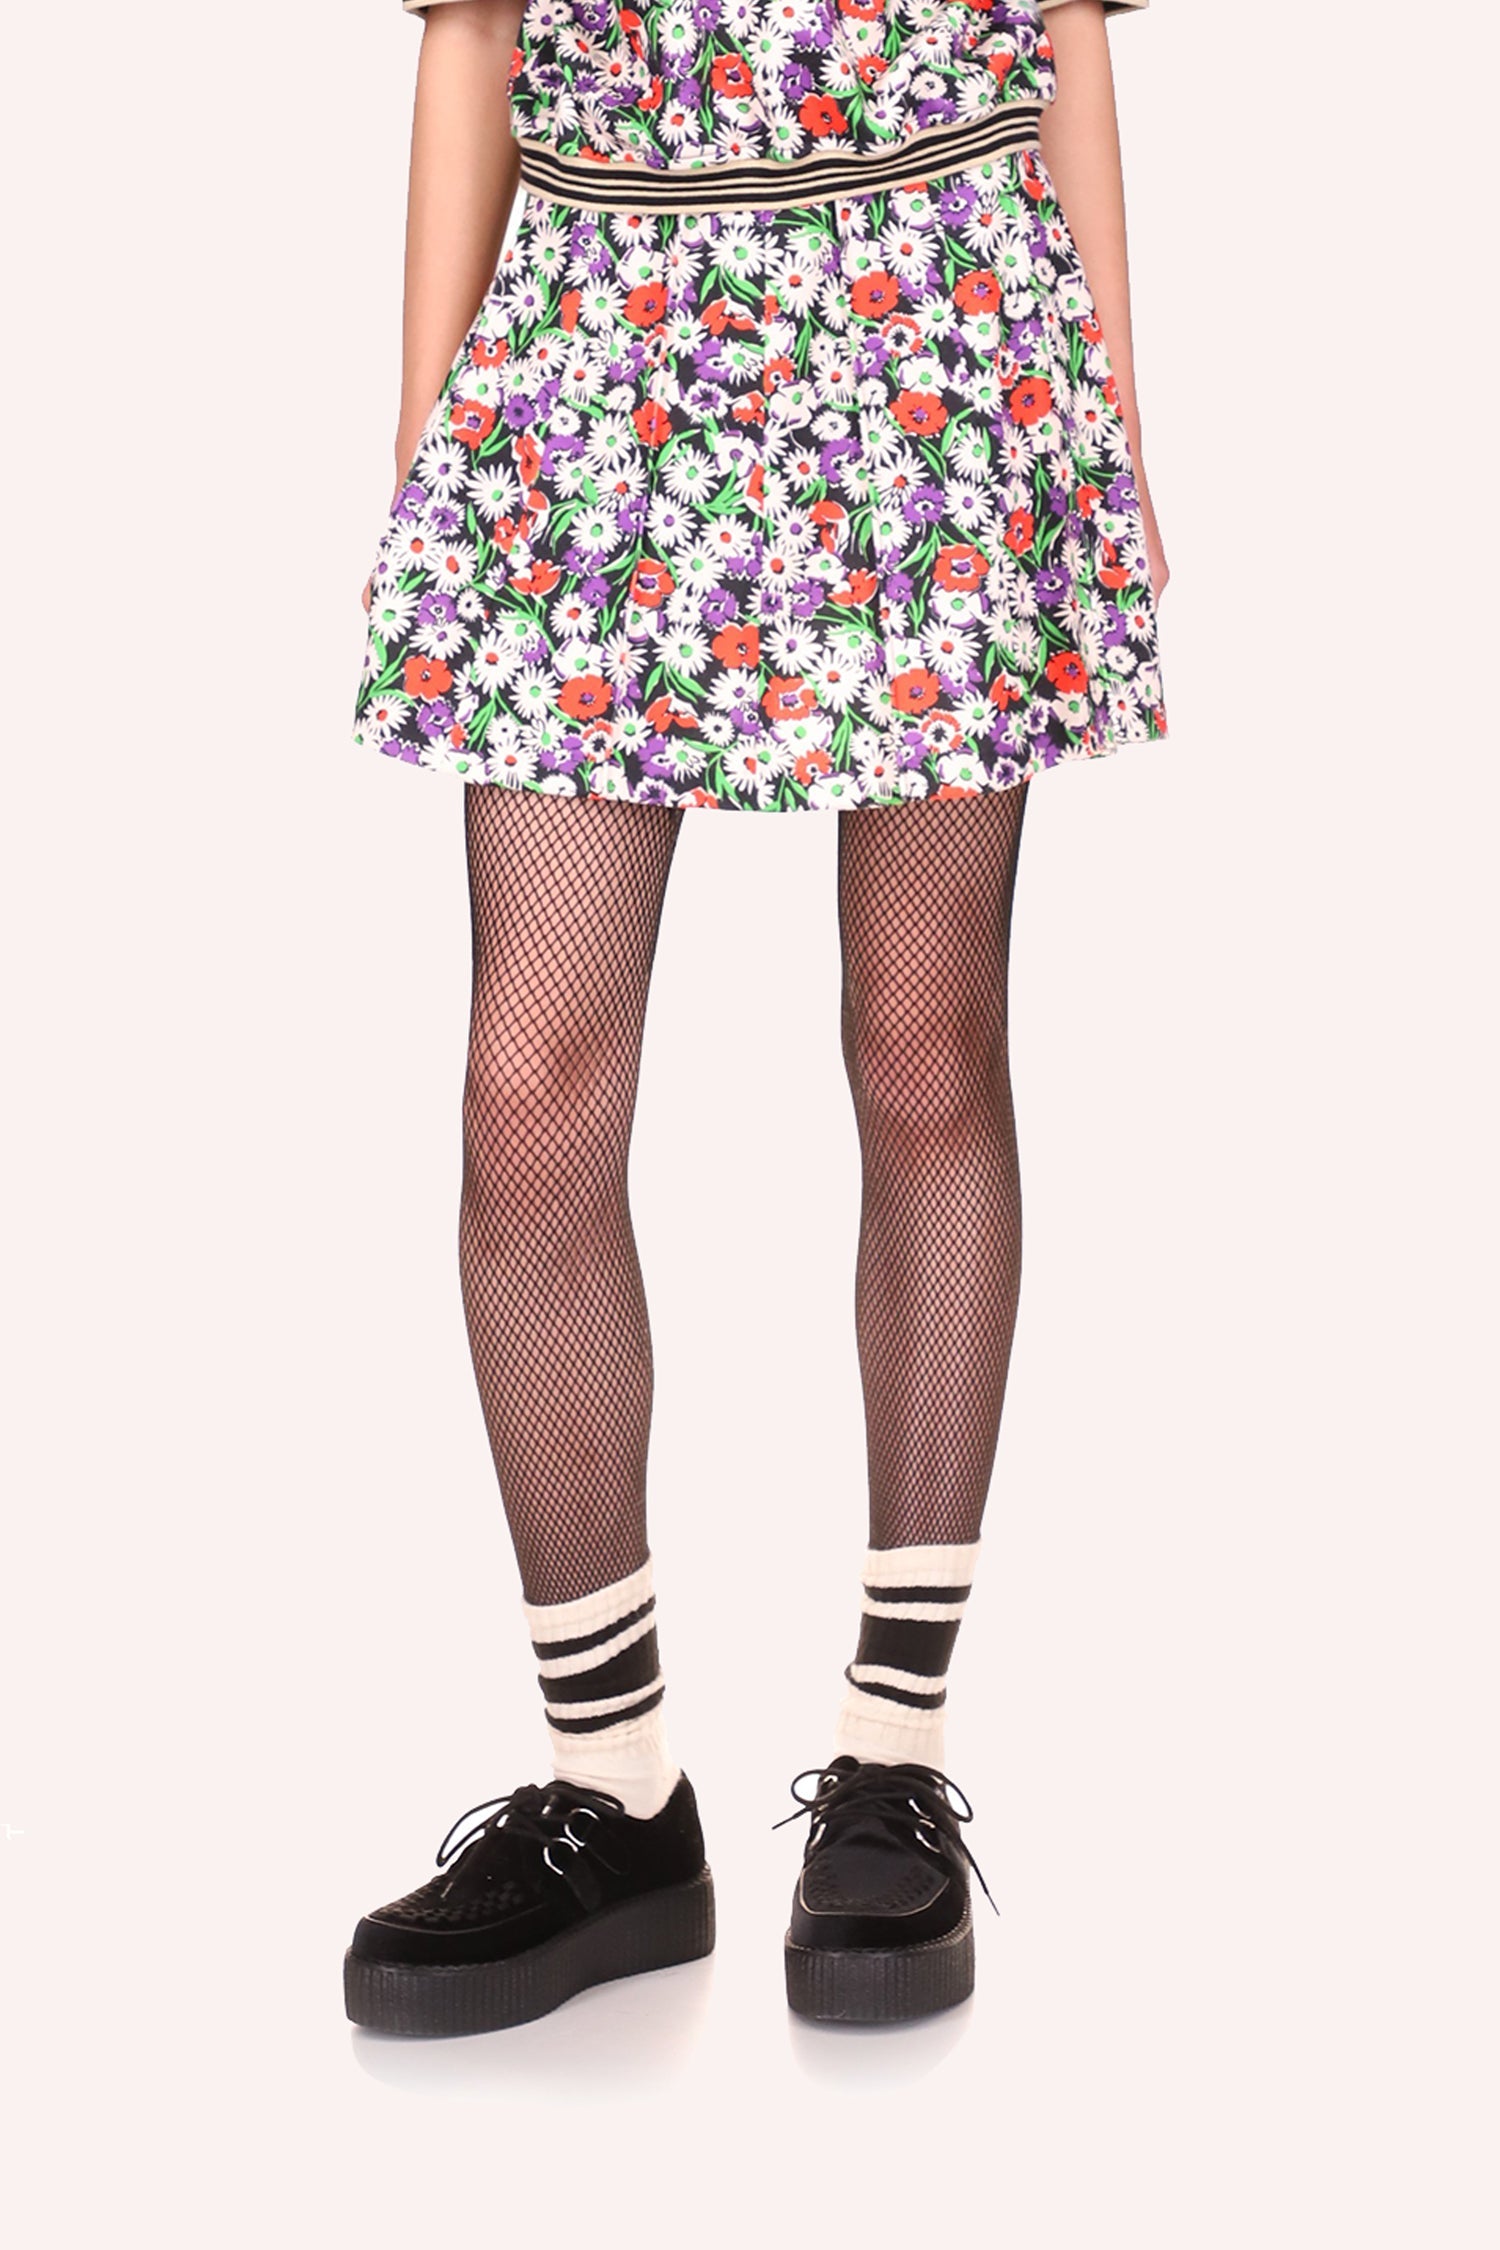 Daisies Skirt Rouge is mini, with a pattern of white daisies with green leaves and red spots